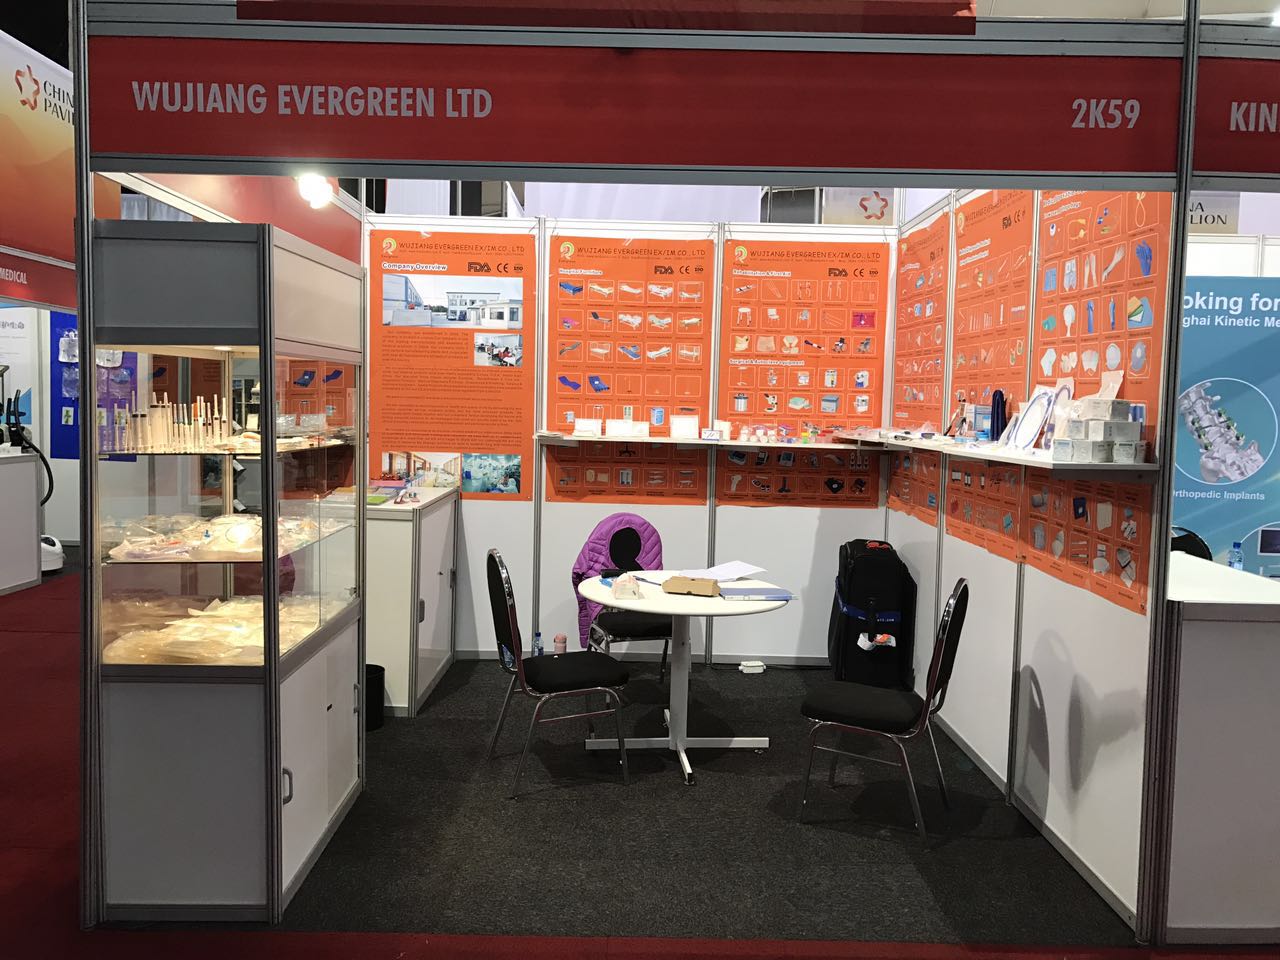 2017 south Africa Health at Johannesburg from 7th June to 9th Jun, 2017. Booth Number: Hall2K59.